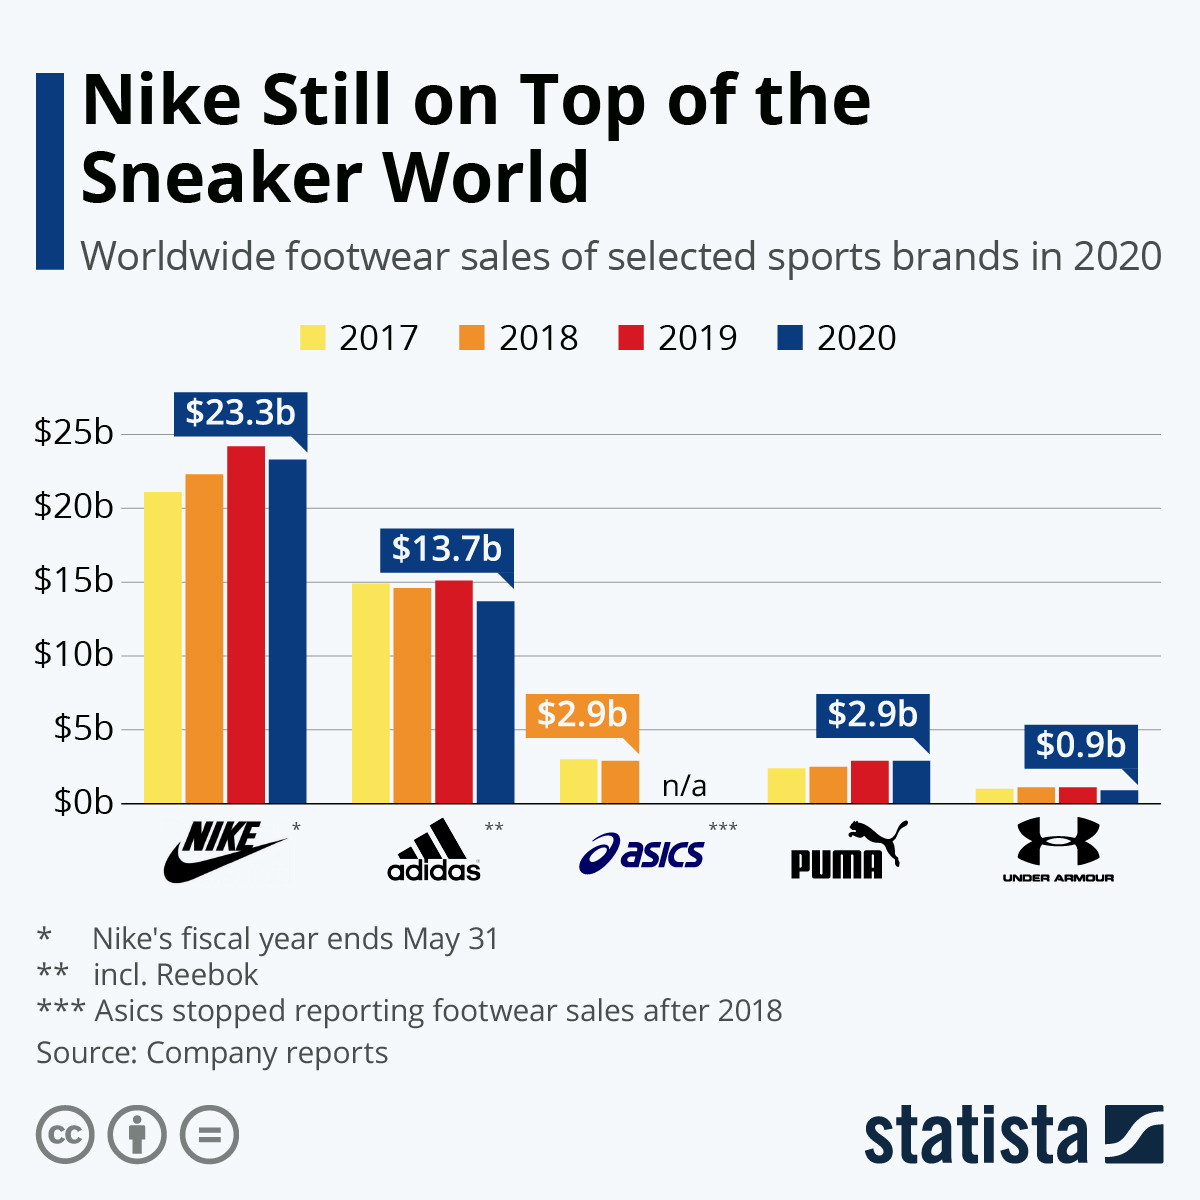 Nike Still on Top of the Sneaker World